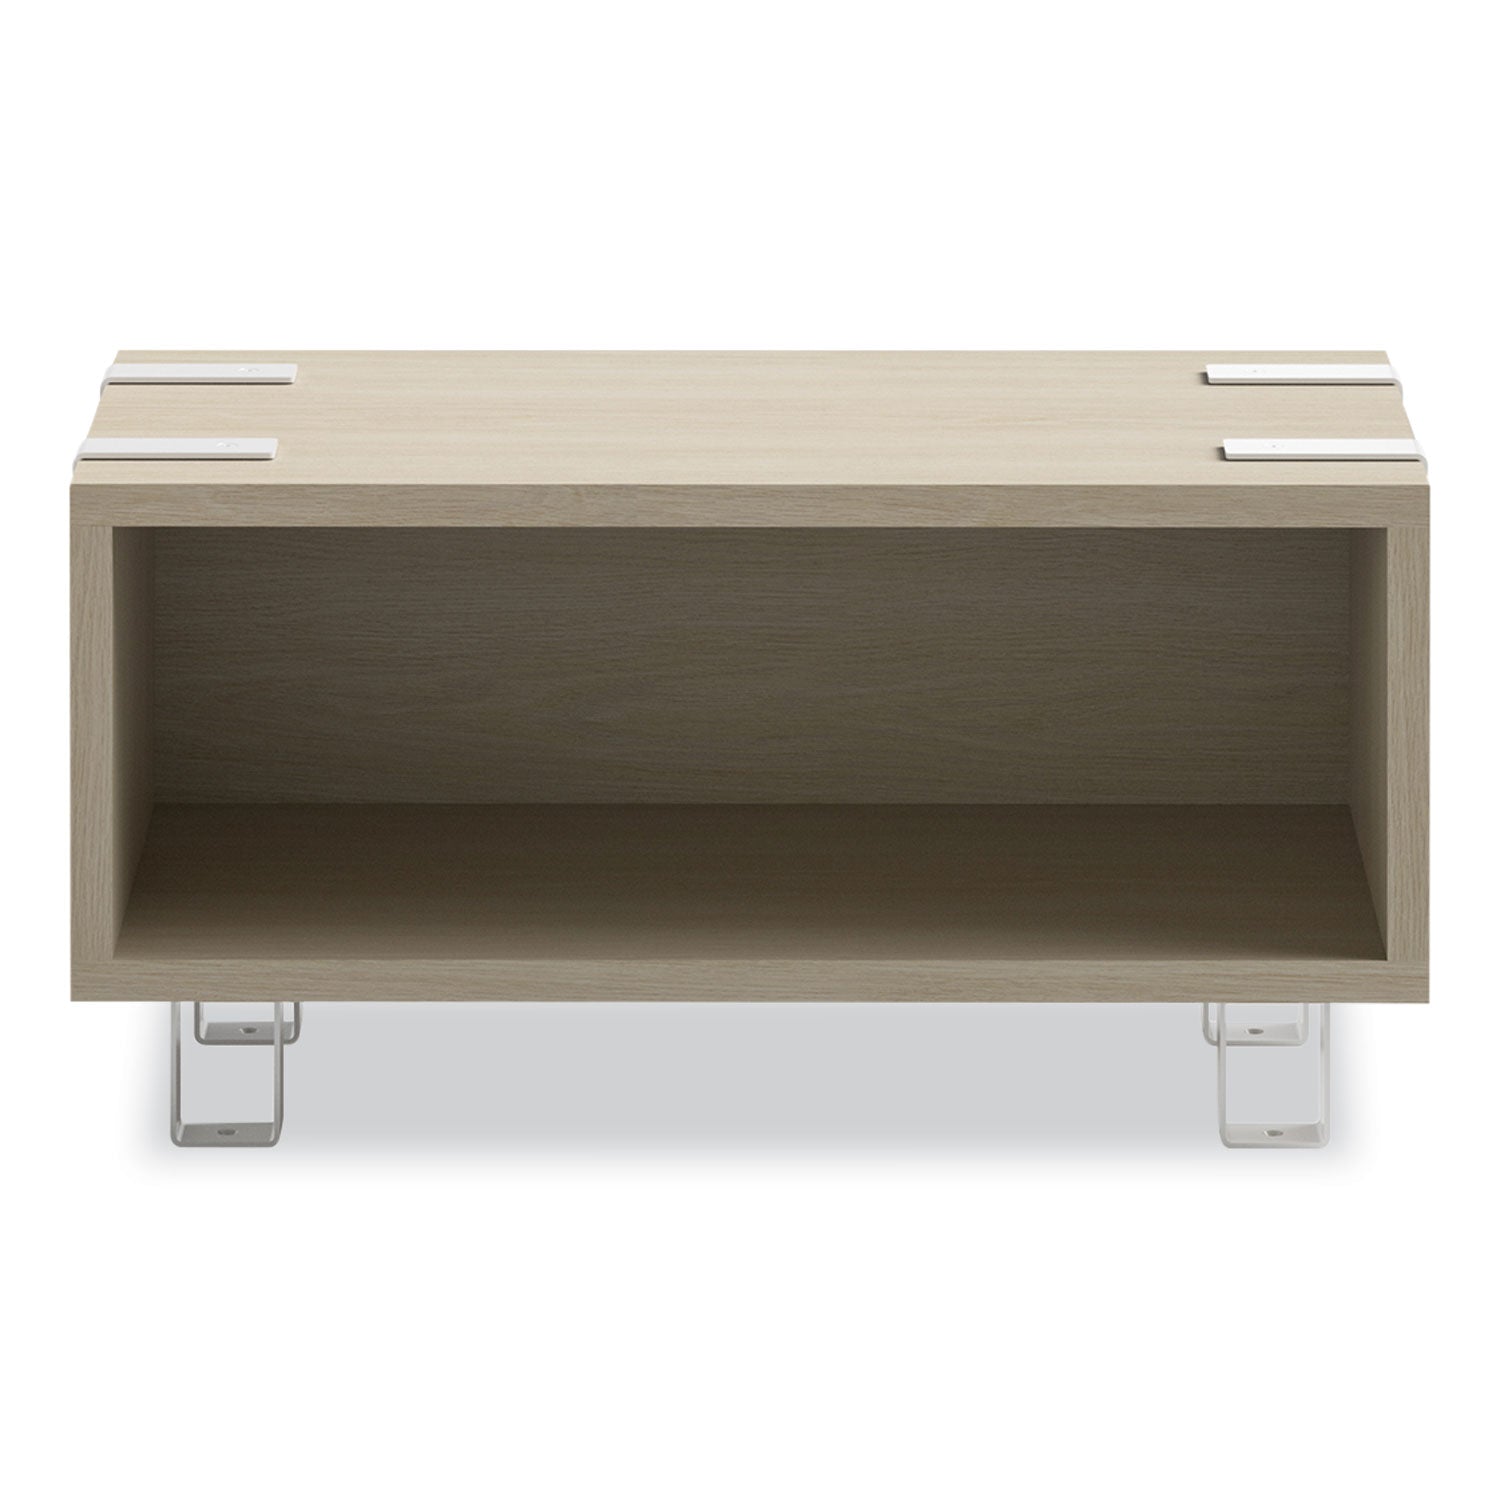 ready-home-office-small-stackable-storage-1-shelf-24w-x-12d-x-1225h-beige-white-ships-in-1-3-business-days_saf5510whna - 4